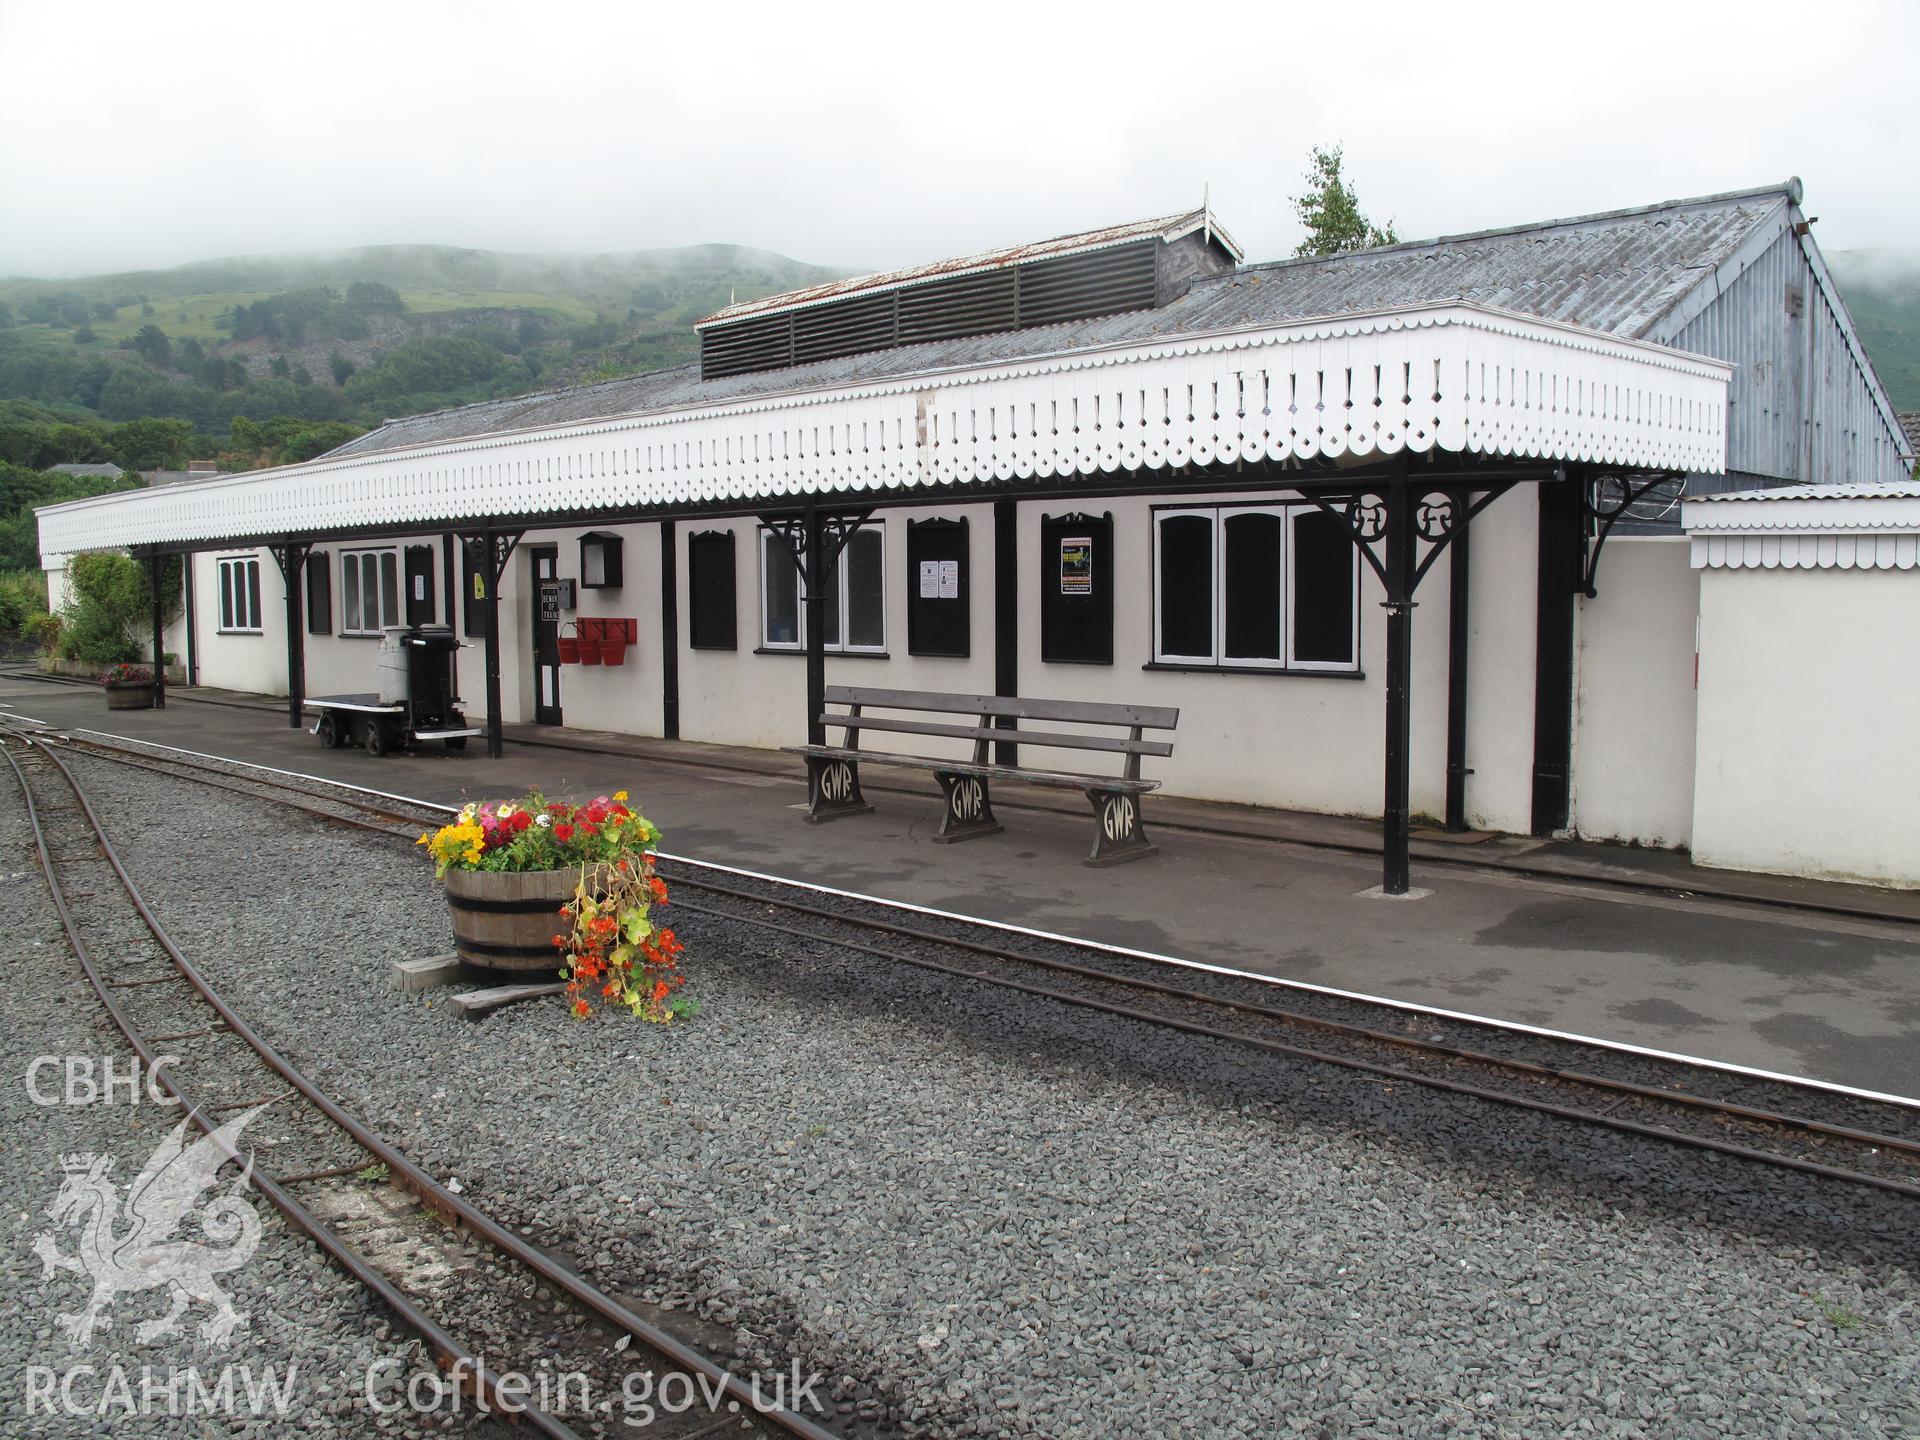 View from the north of Fairbourne Station, Fairbourne Railway.